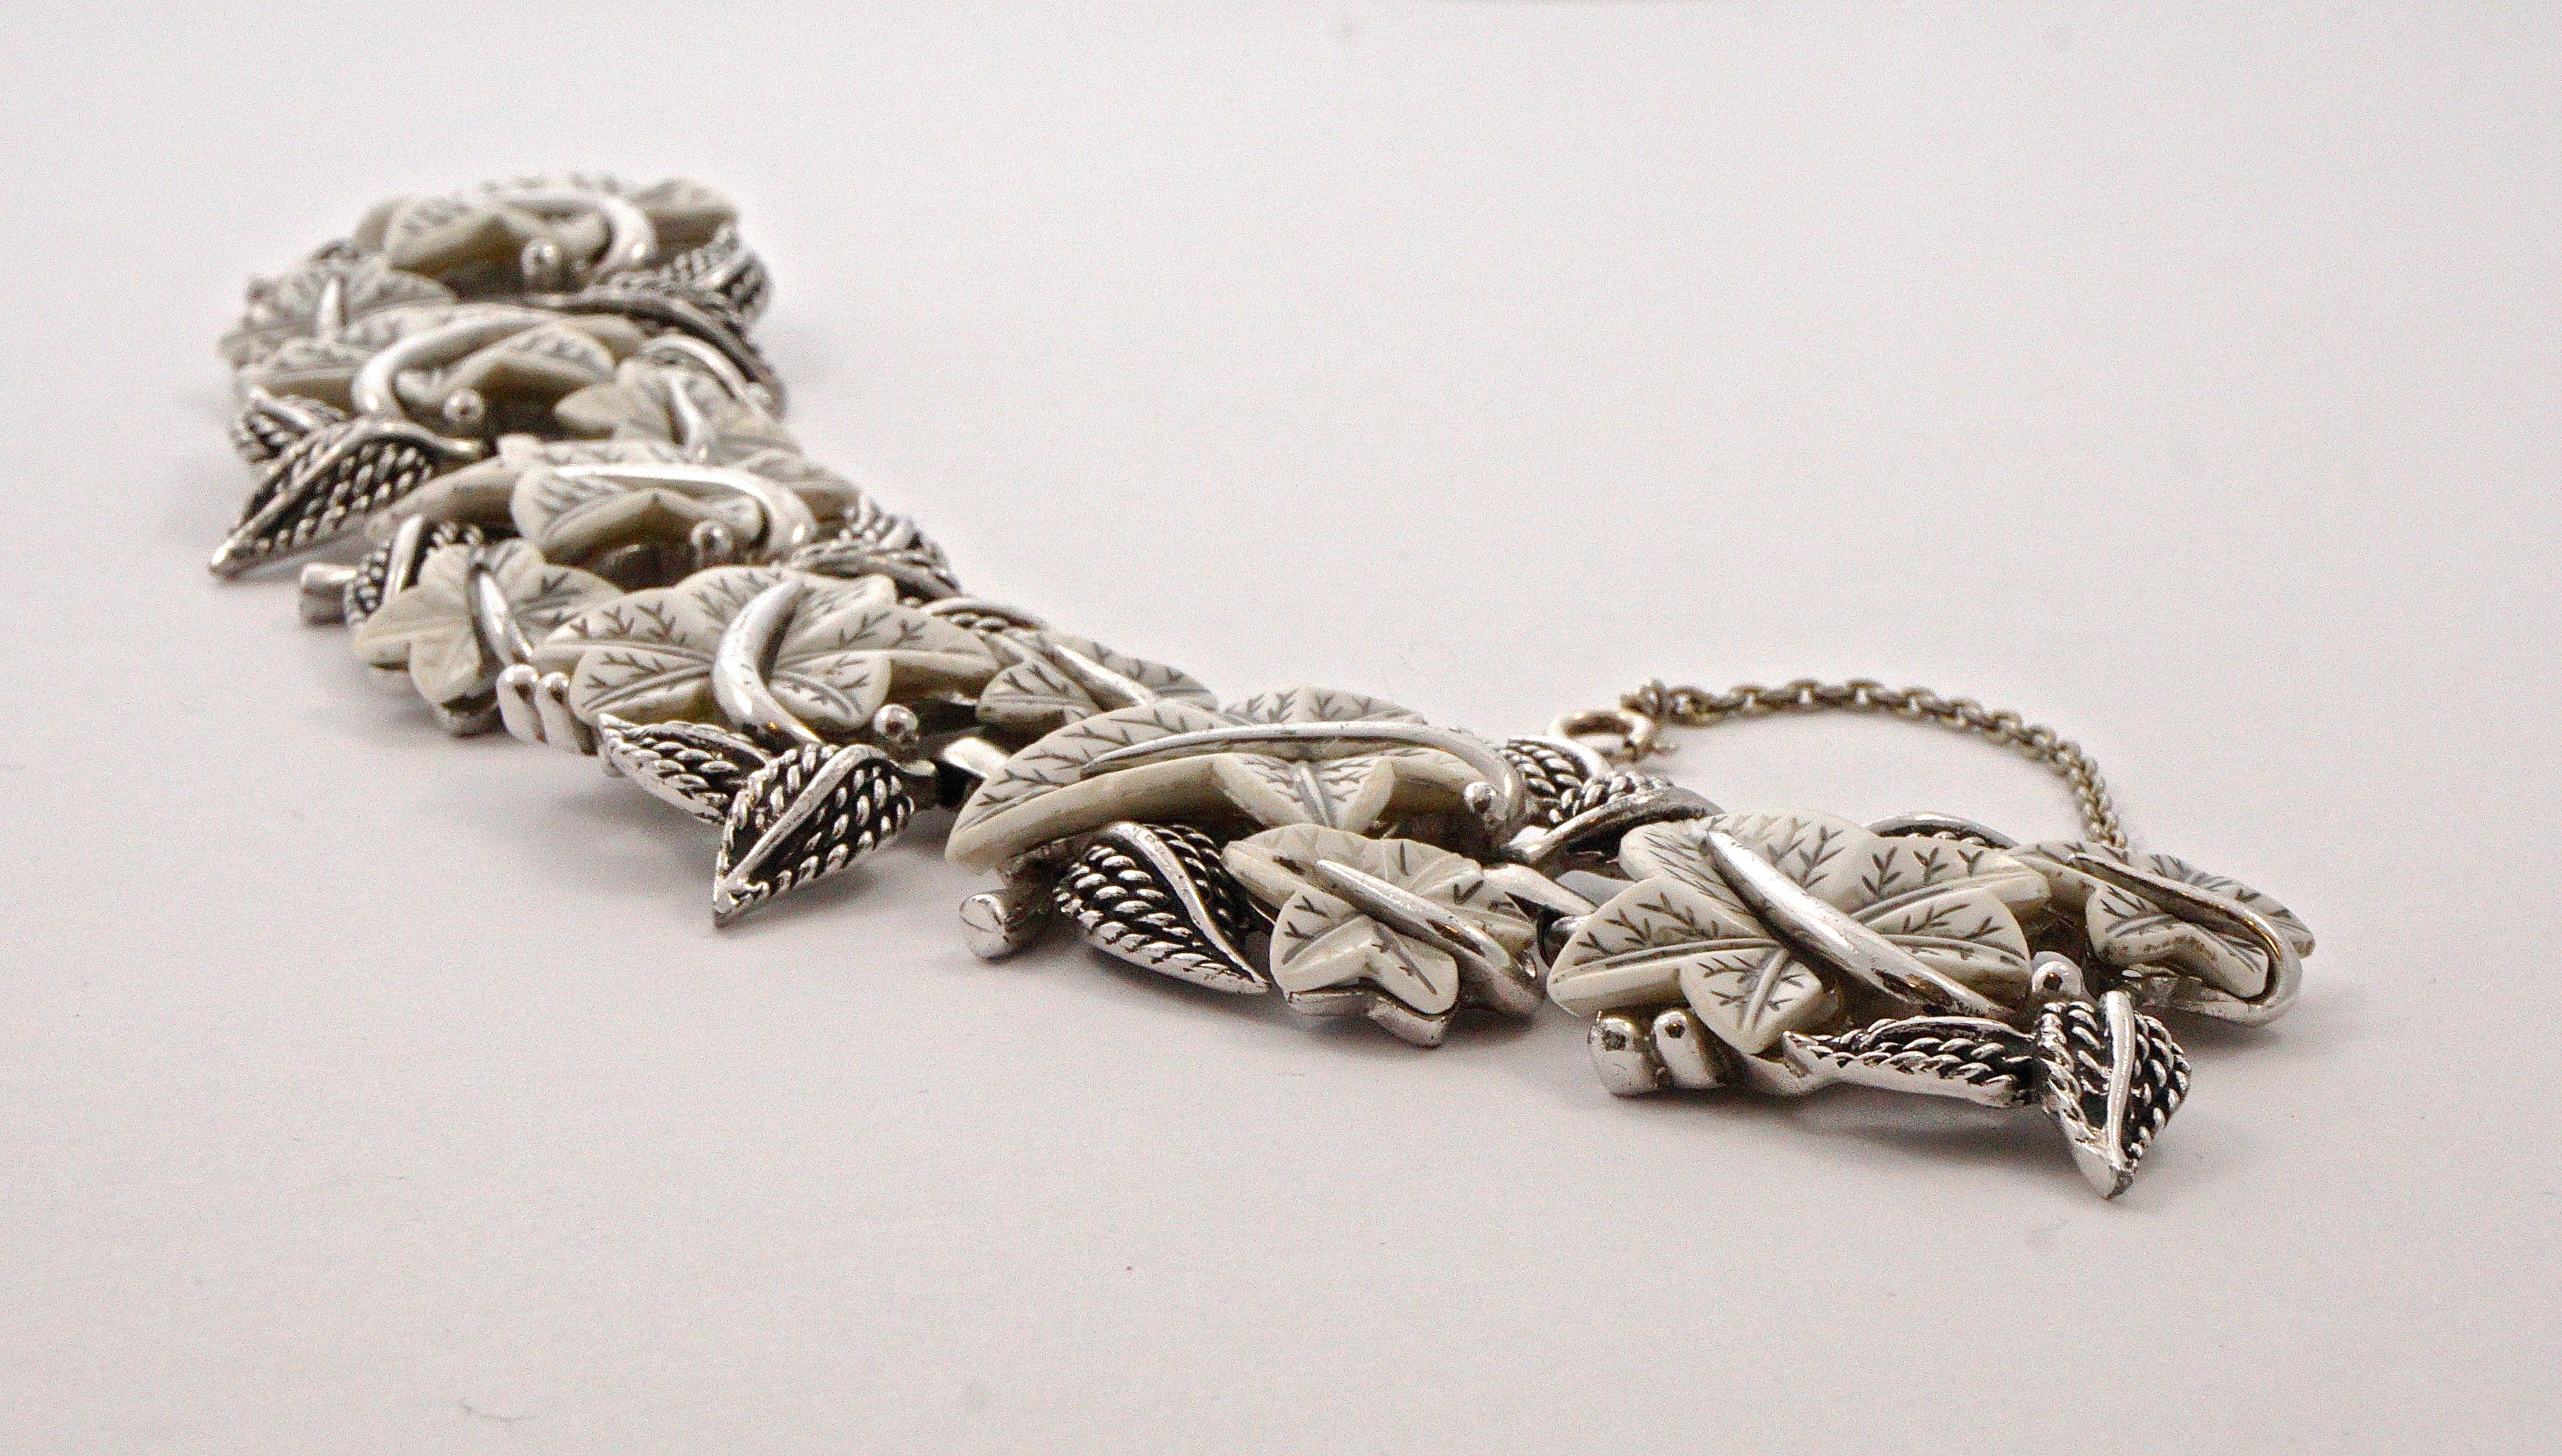 Boucher fabulous silver plated link bracelet, featuring wonderful white glass ivy leaves with engraved grey veins. Measuring length 19cm / 7.5 inches by width approximately 3.3cm / 1.3 inches. The grey veins have some wear, the very pale gold tone